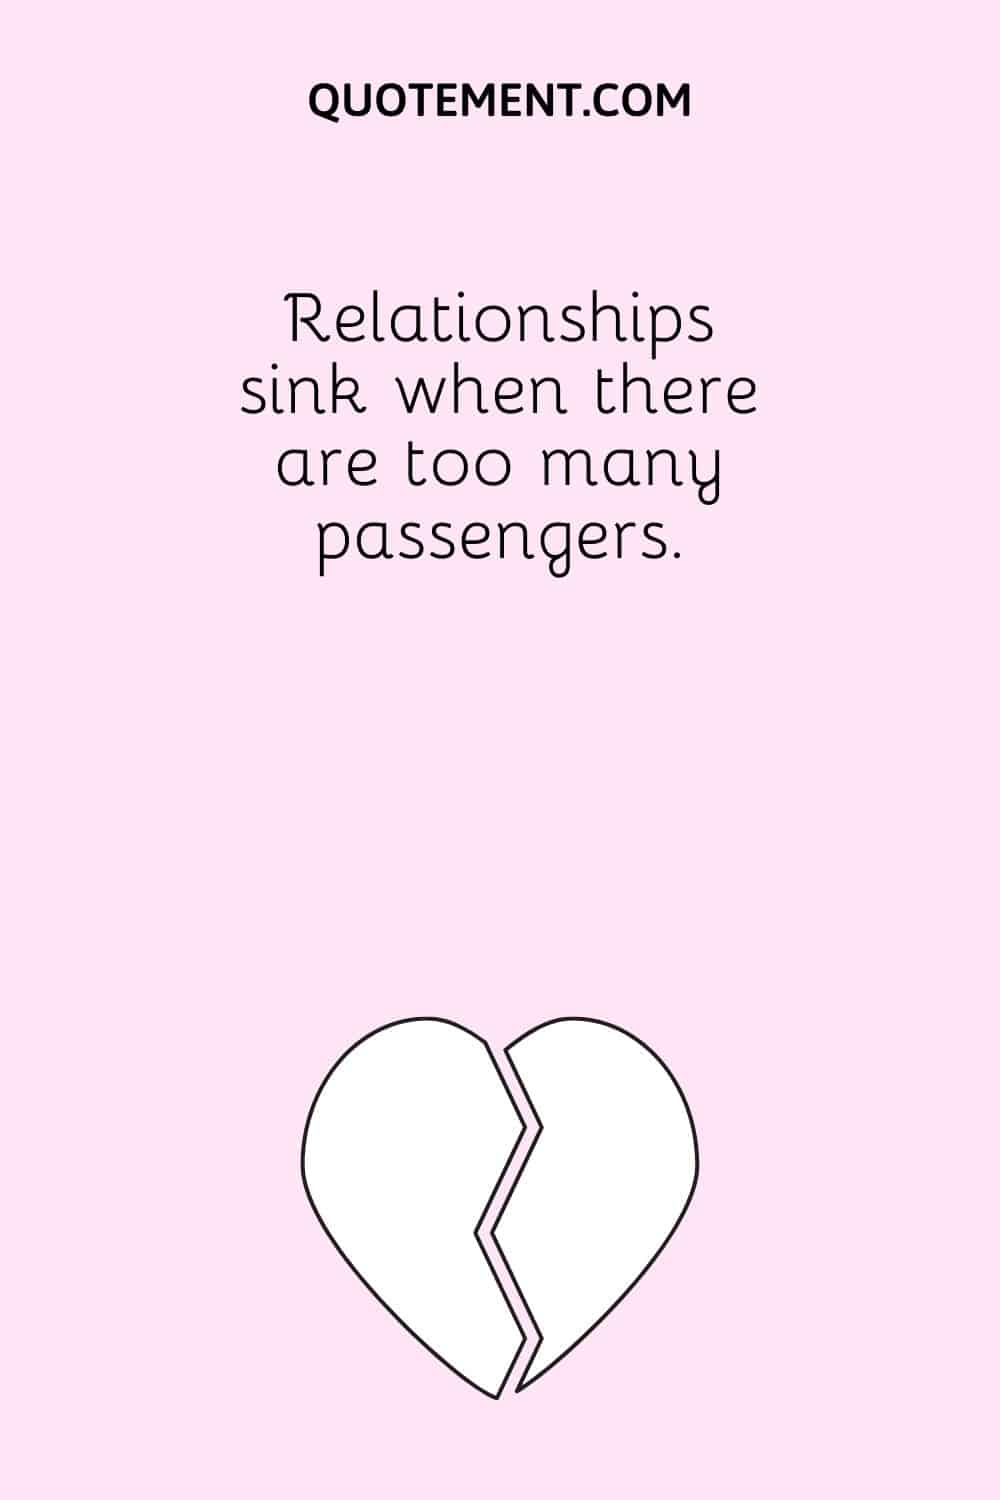 Relationships sink when there are too many passengers.